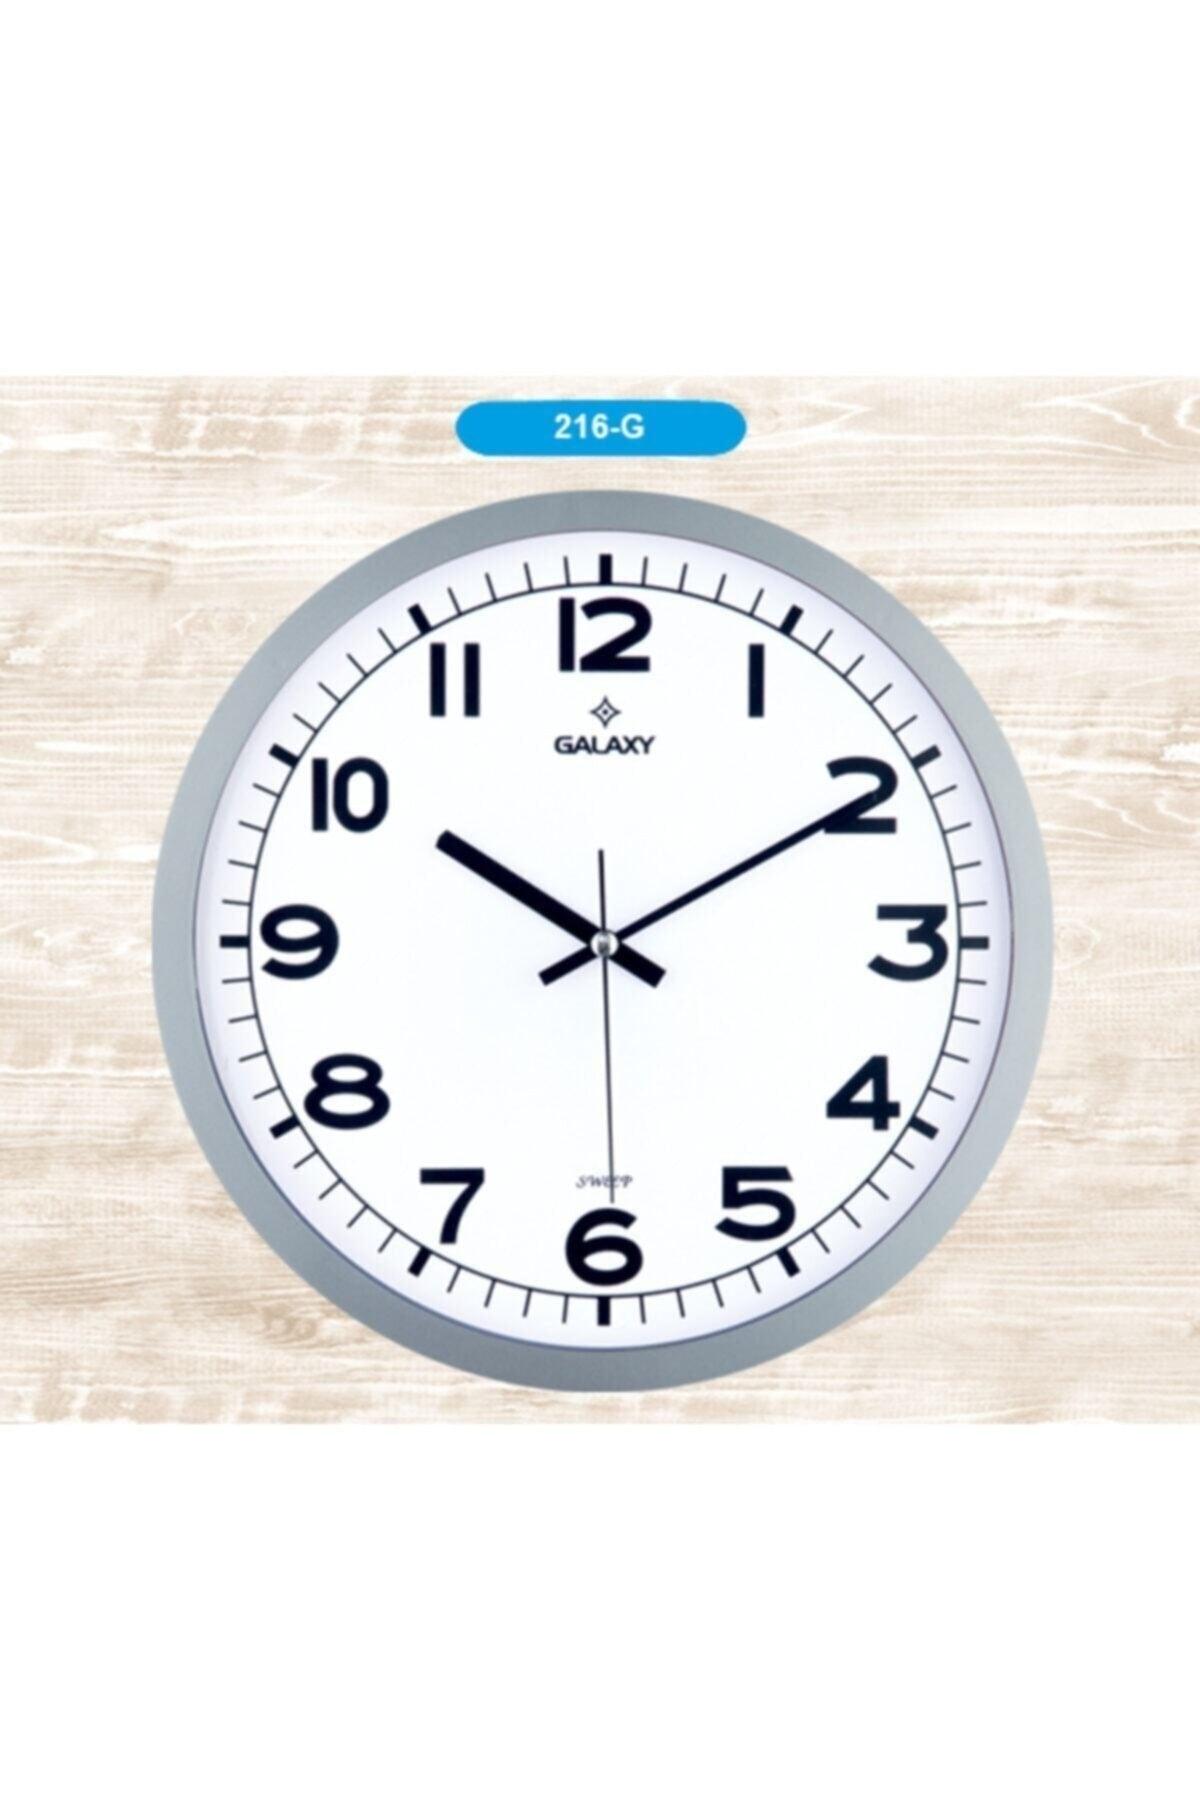 Wall Clock Living Room-office-workplace-office-home-kitchen-warehouse Stylish Design Brand -Same Day Free Shipping - Swordslife